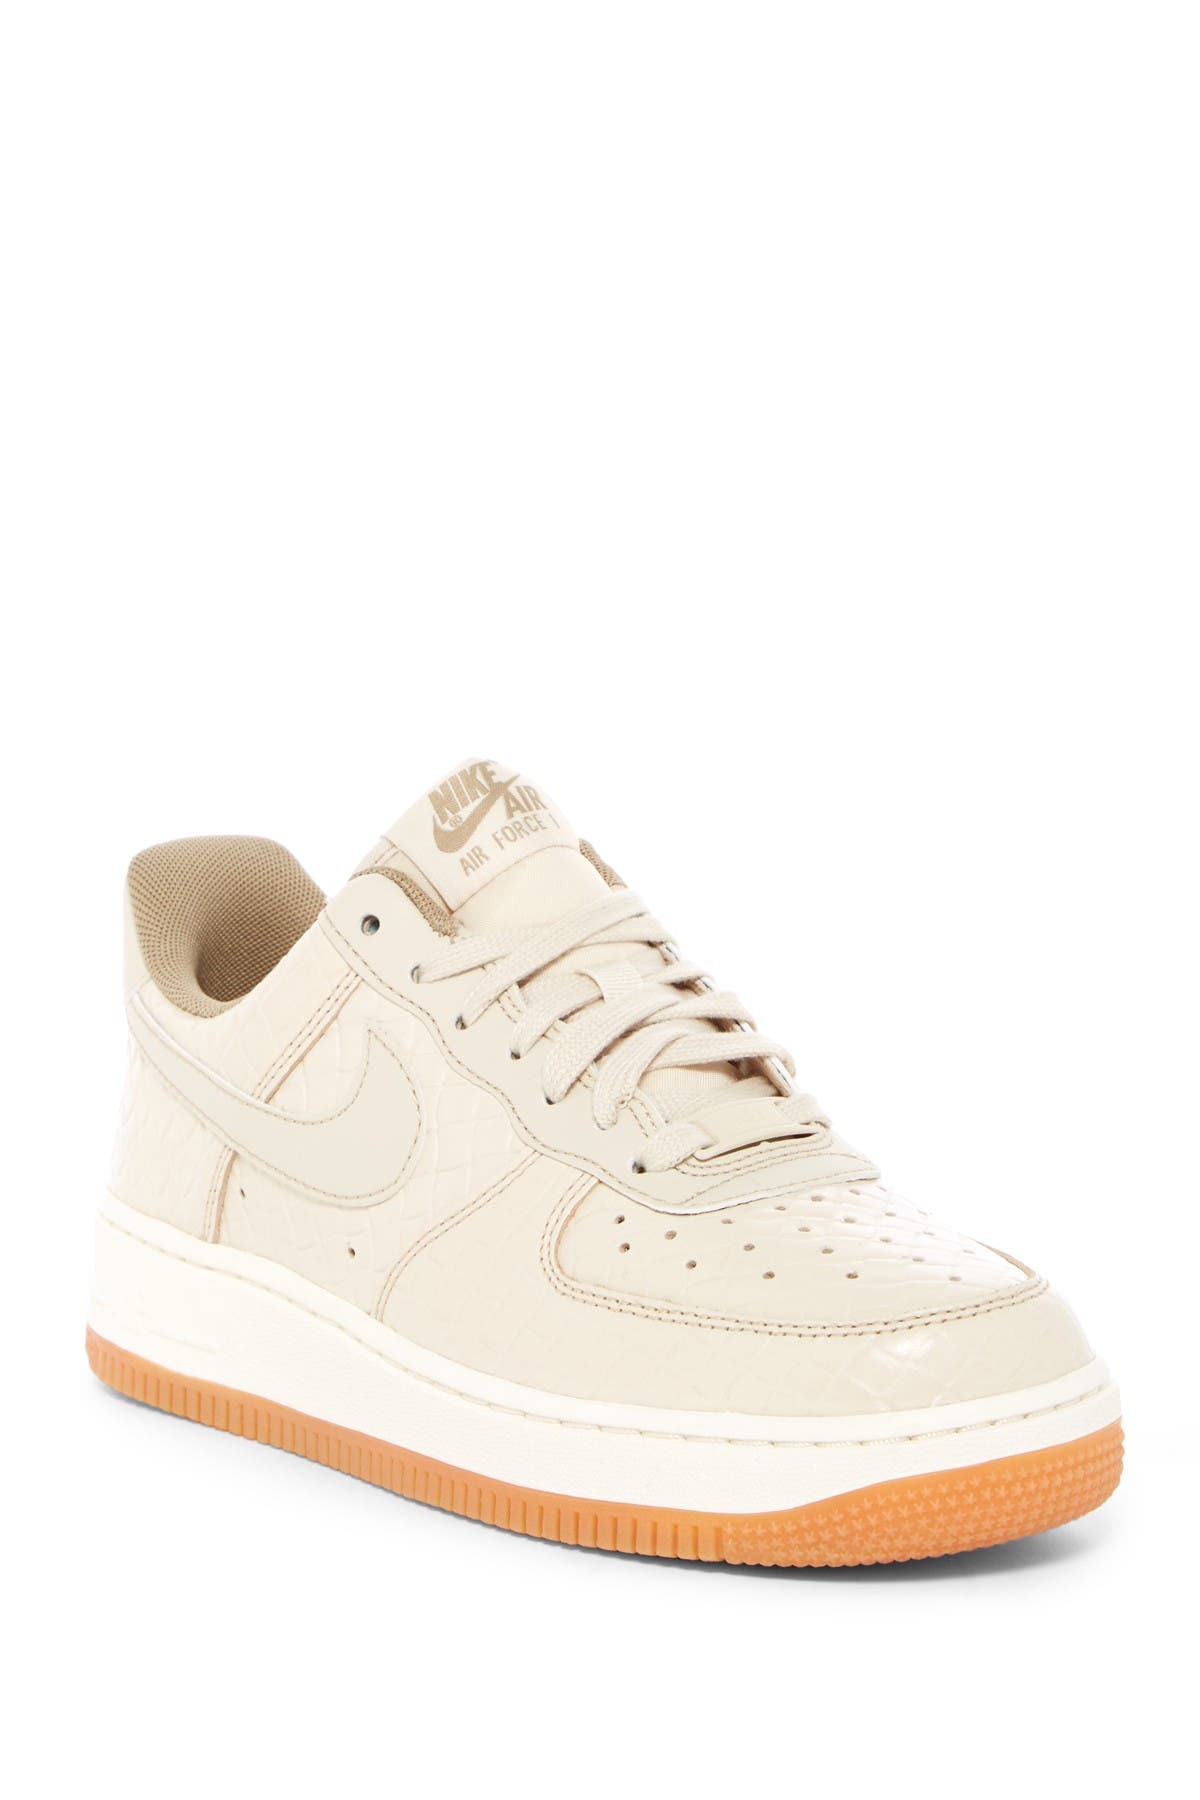 air force 1 nordstrom